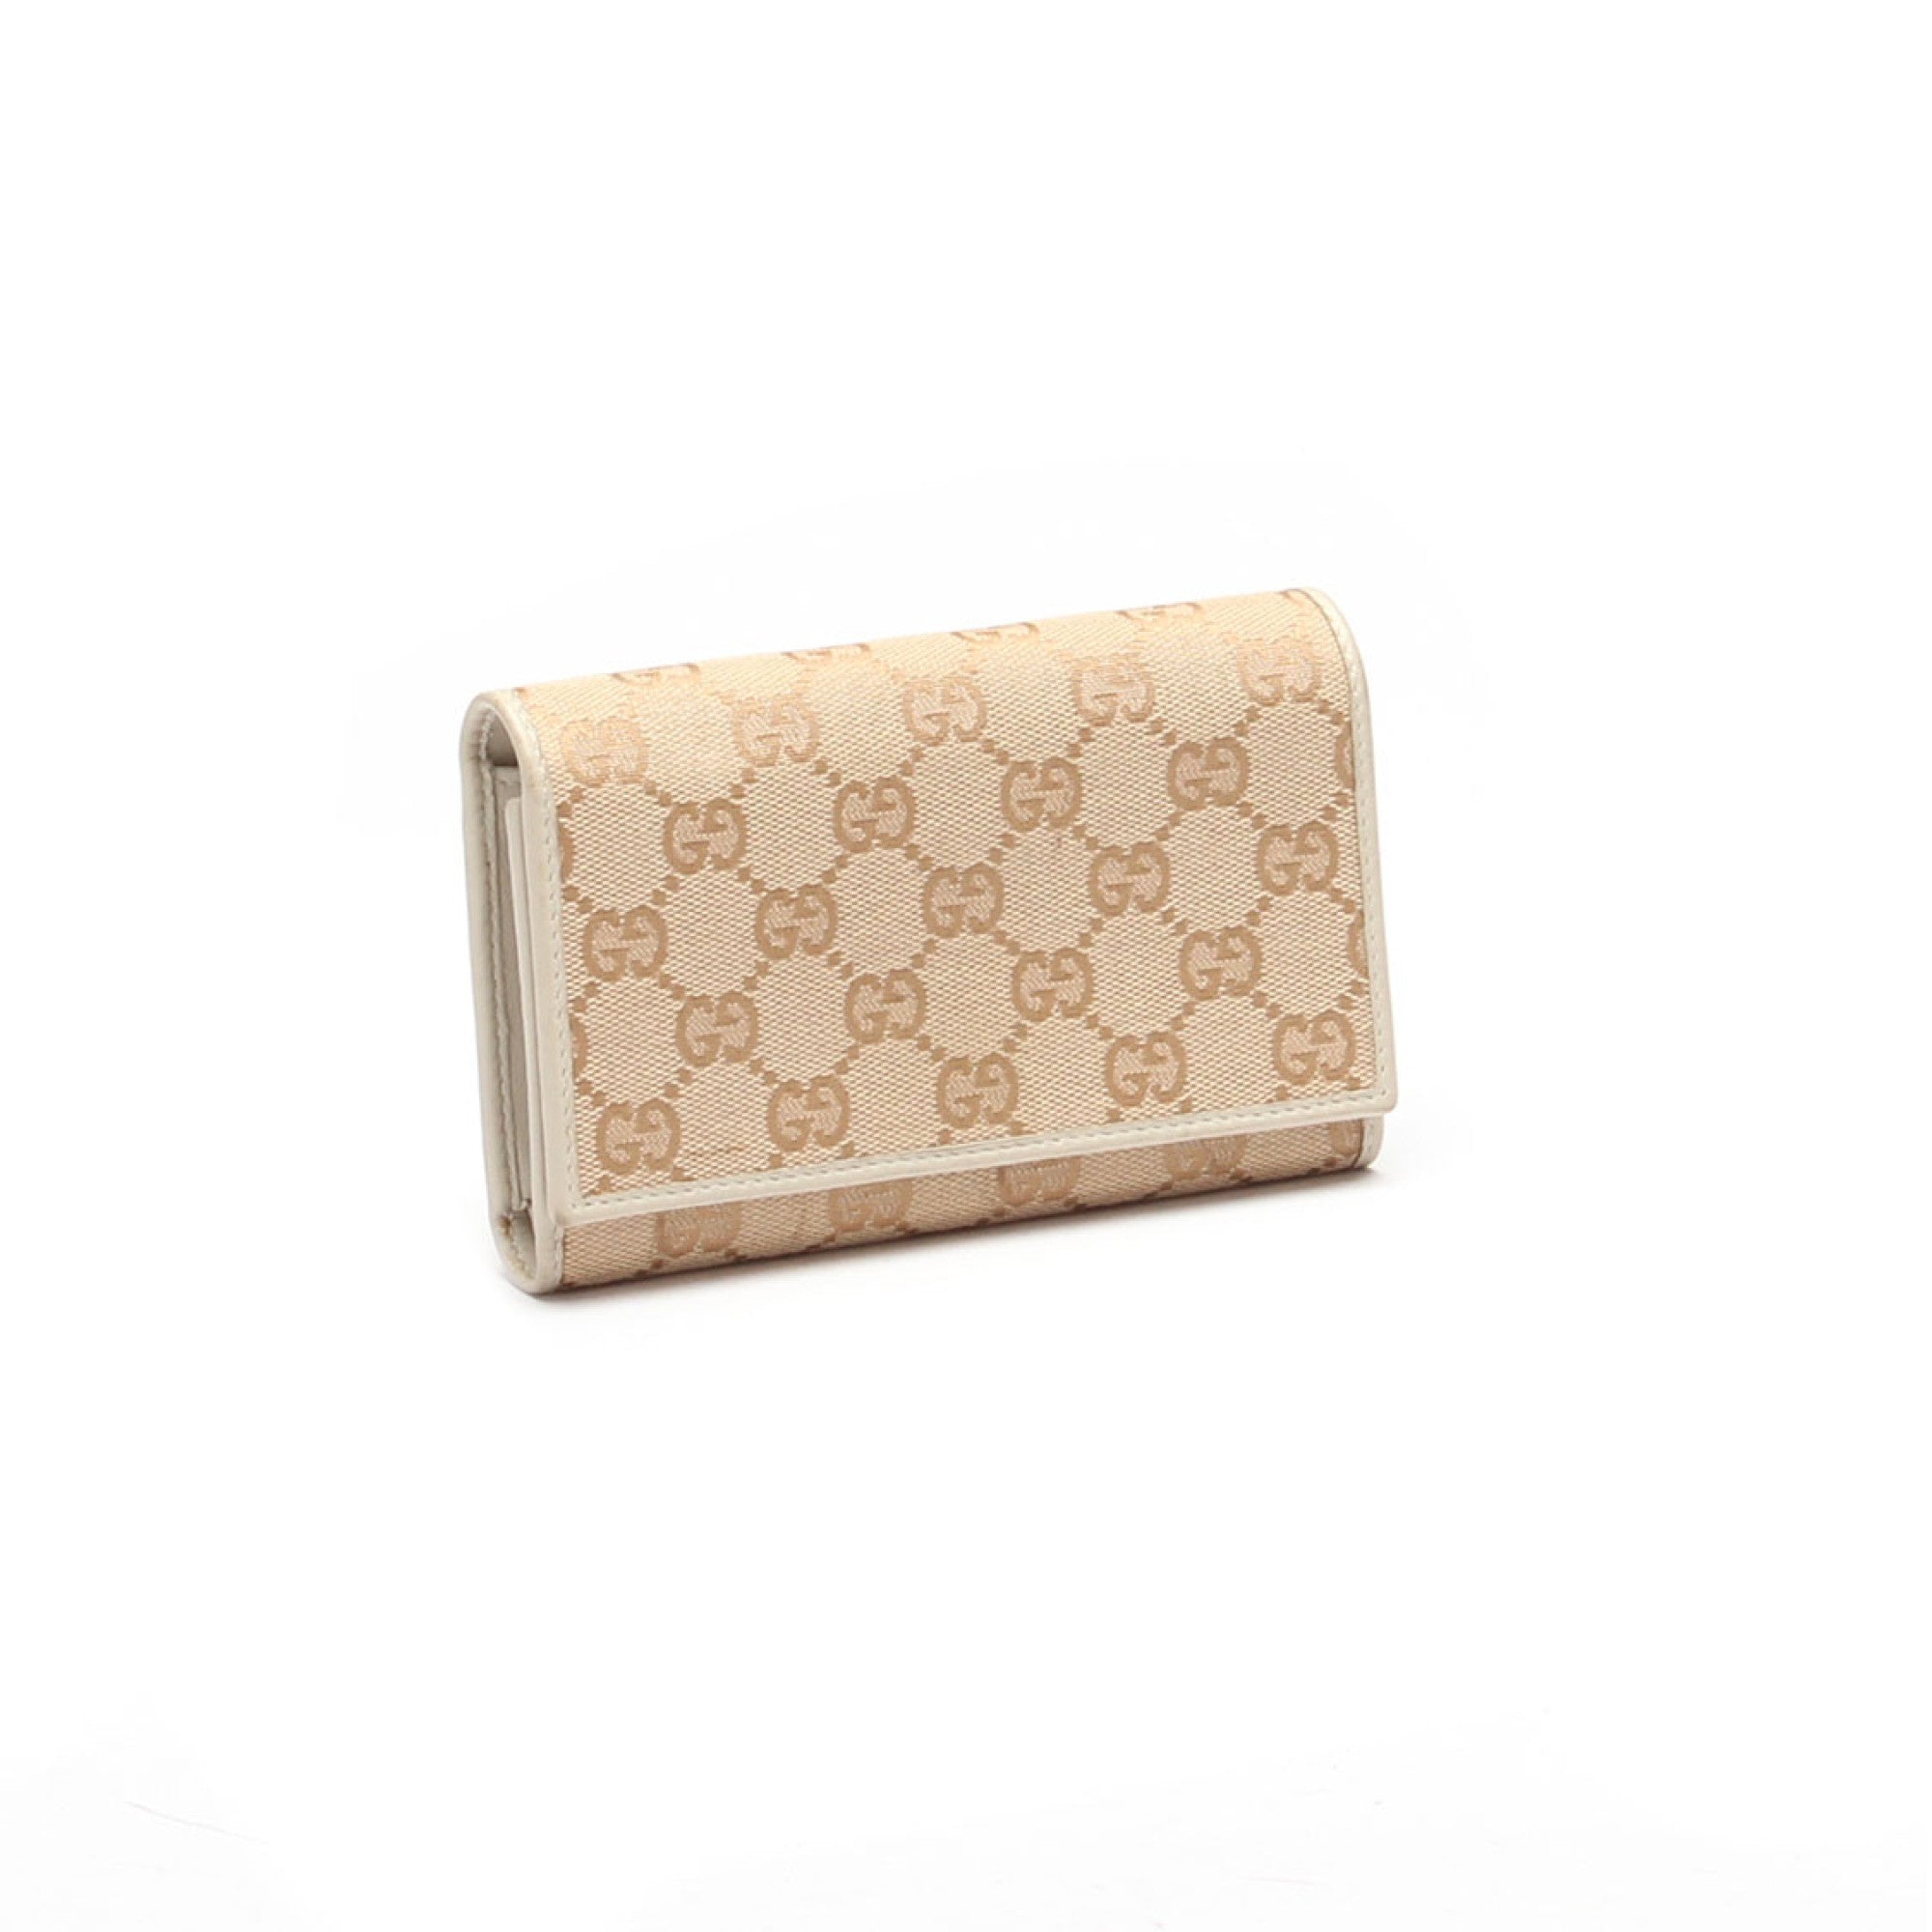 PRELOVED Gucci Beige Leather and GG Canvas Compact Wallet 1127160416 0 –  KimmieBBags LLC